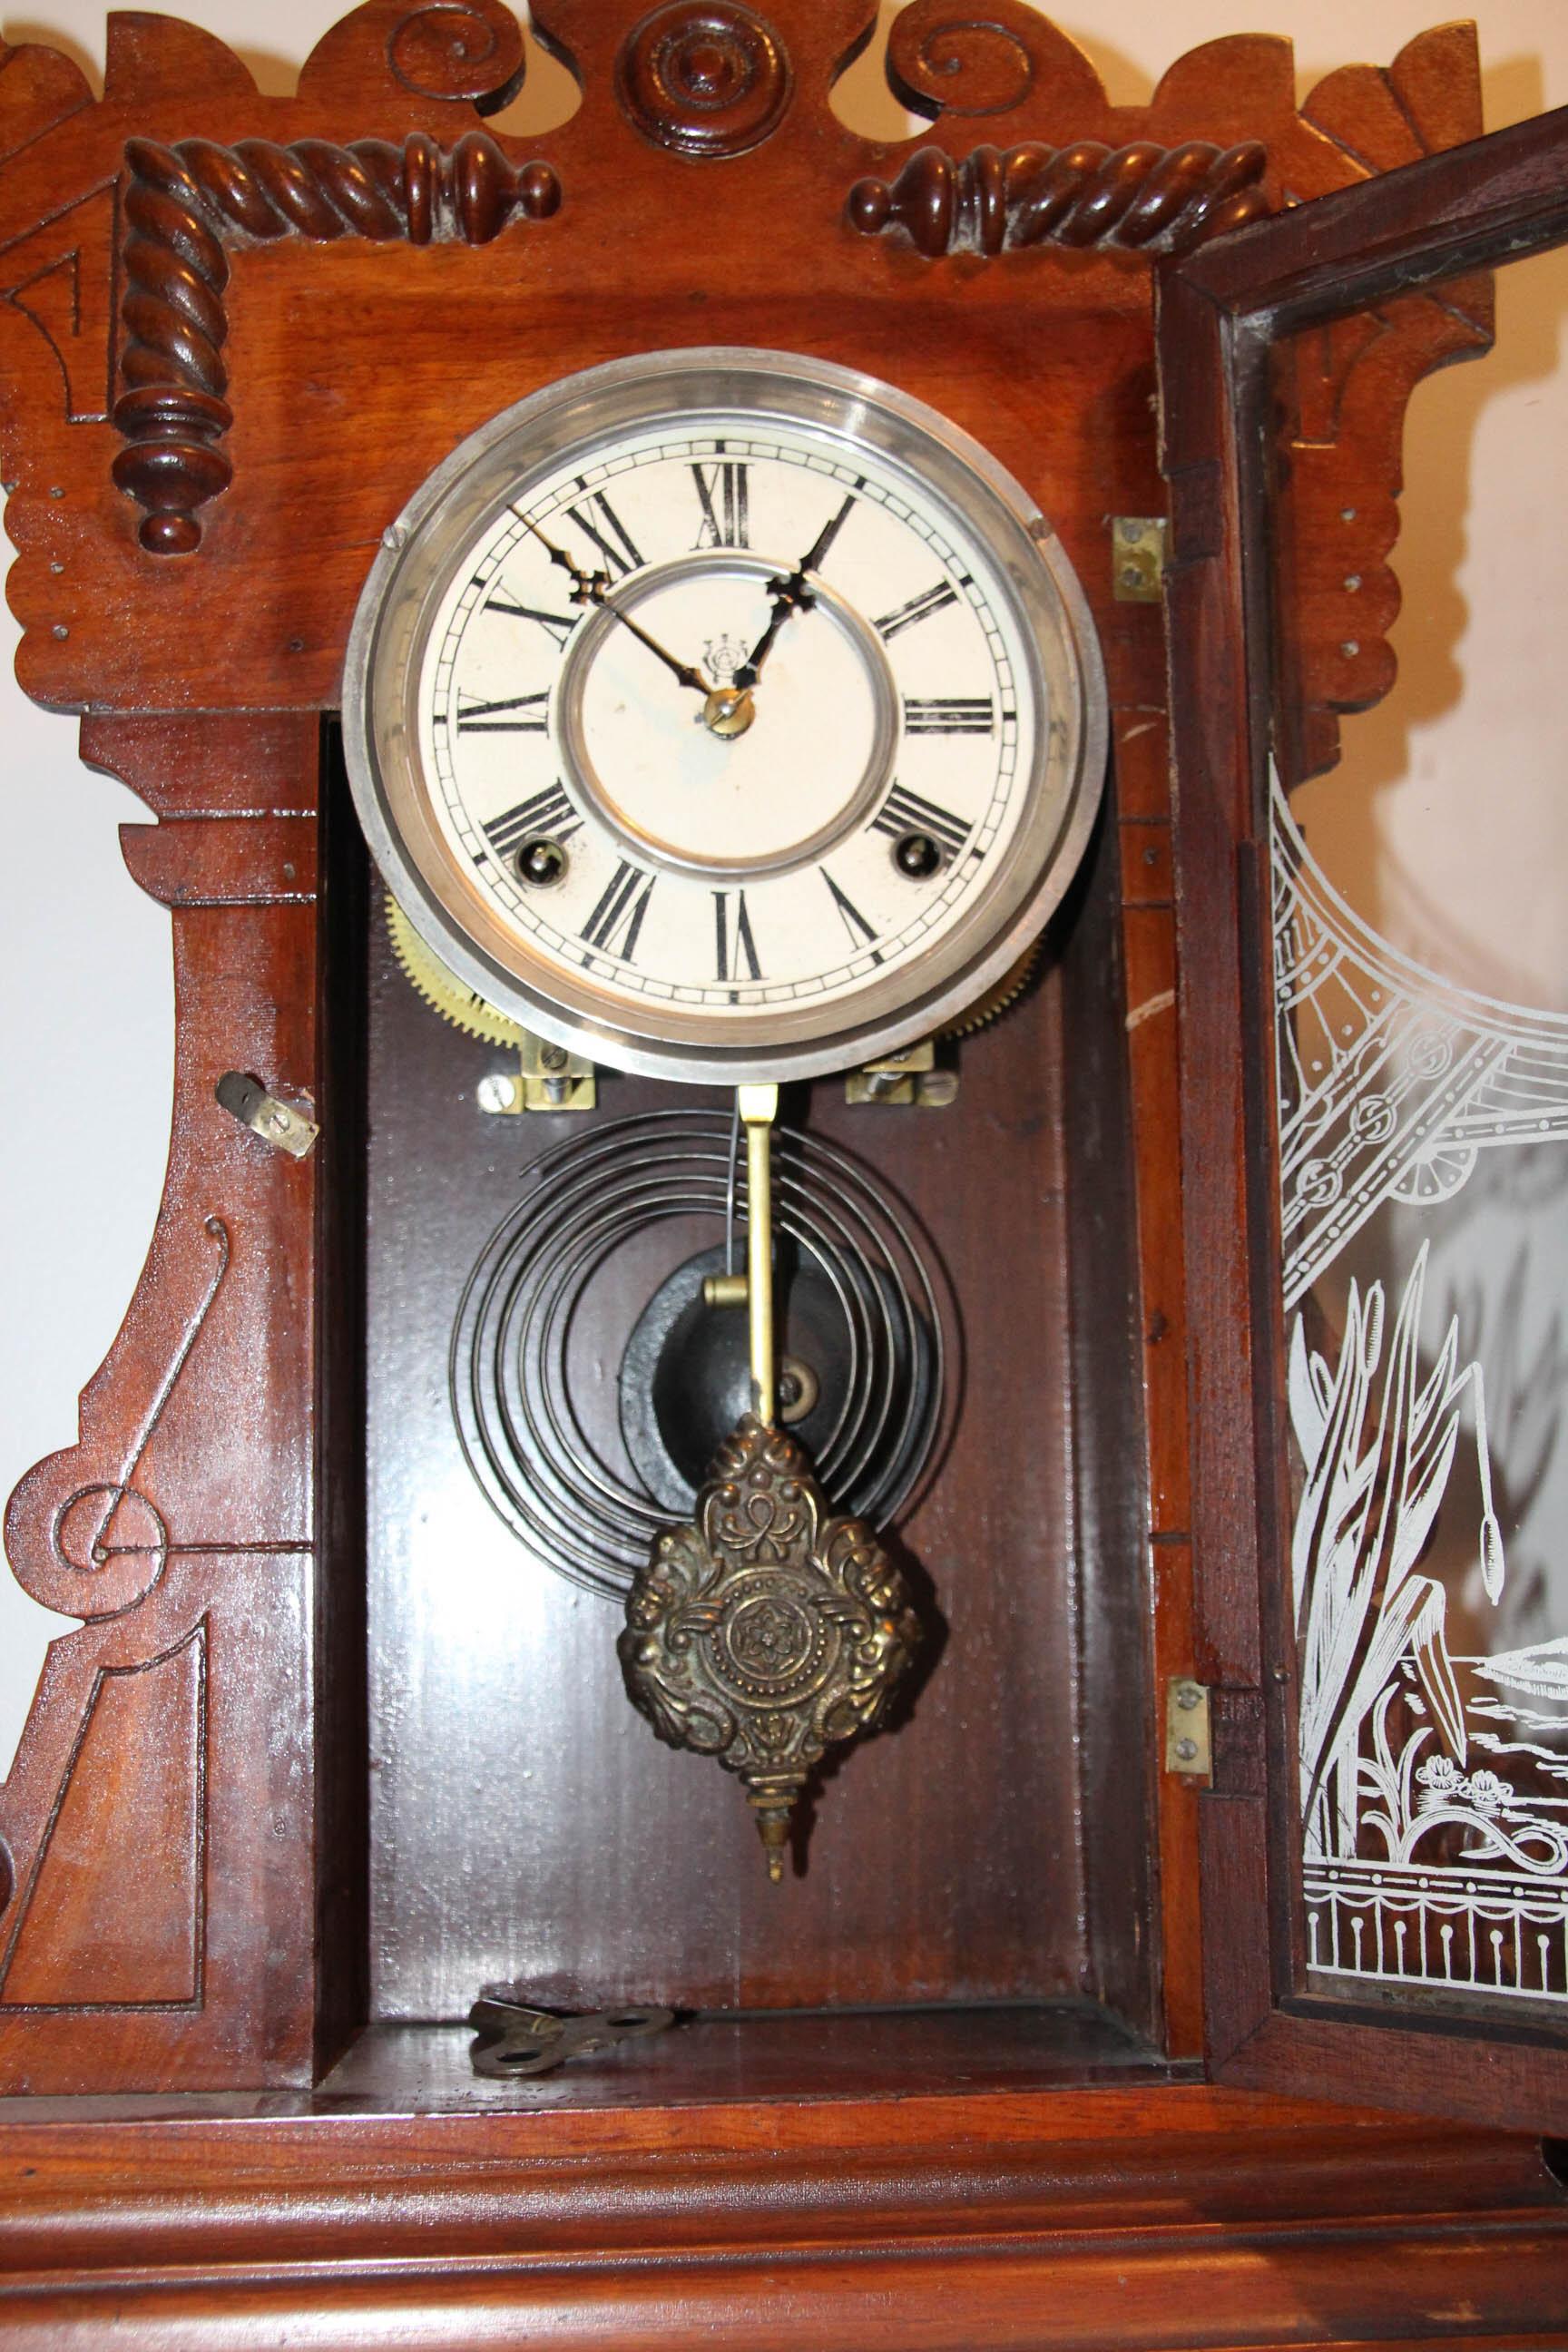 Mantle clock with storks